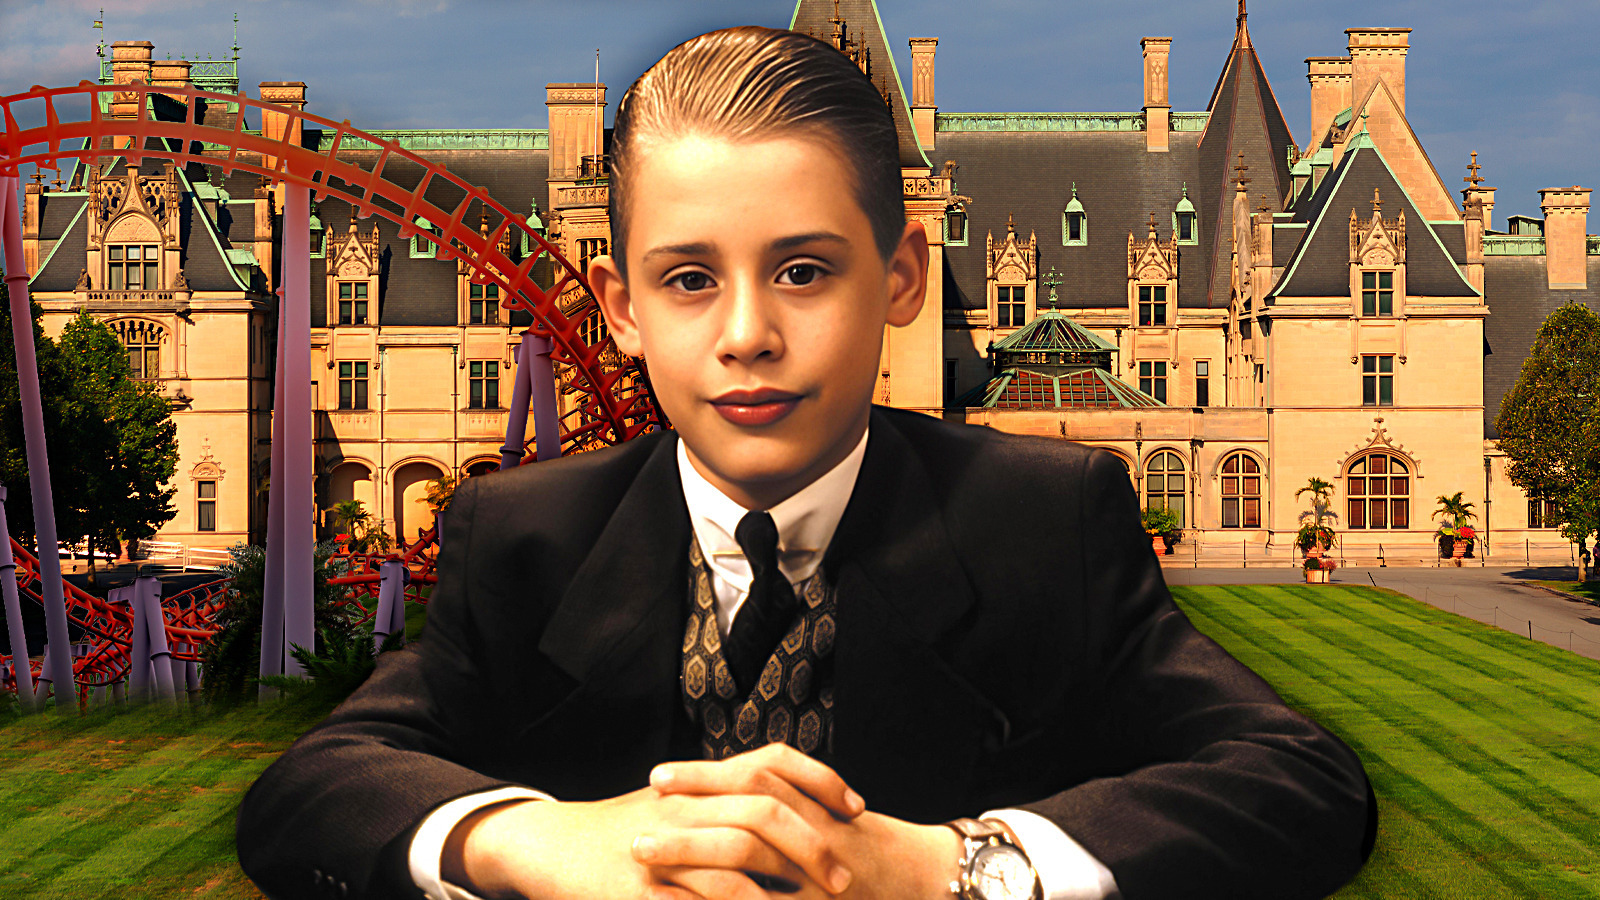 Discover the Mind-Blowing Net Worth of Richie Rich in Today’s Economy – Expert Analysis Inside!